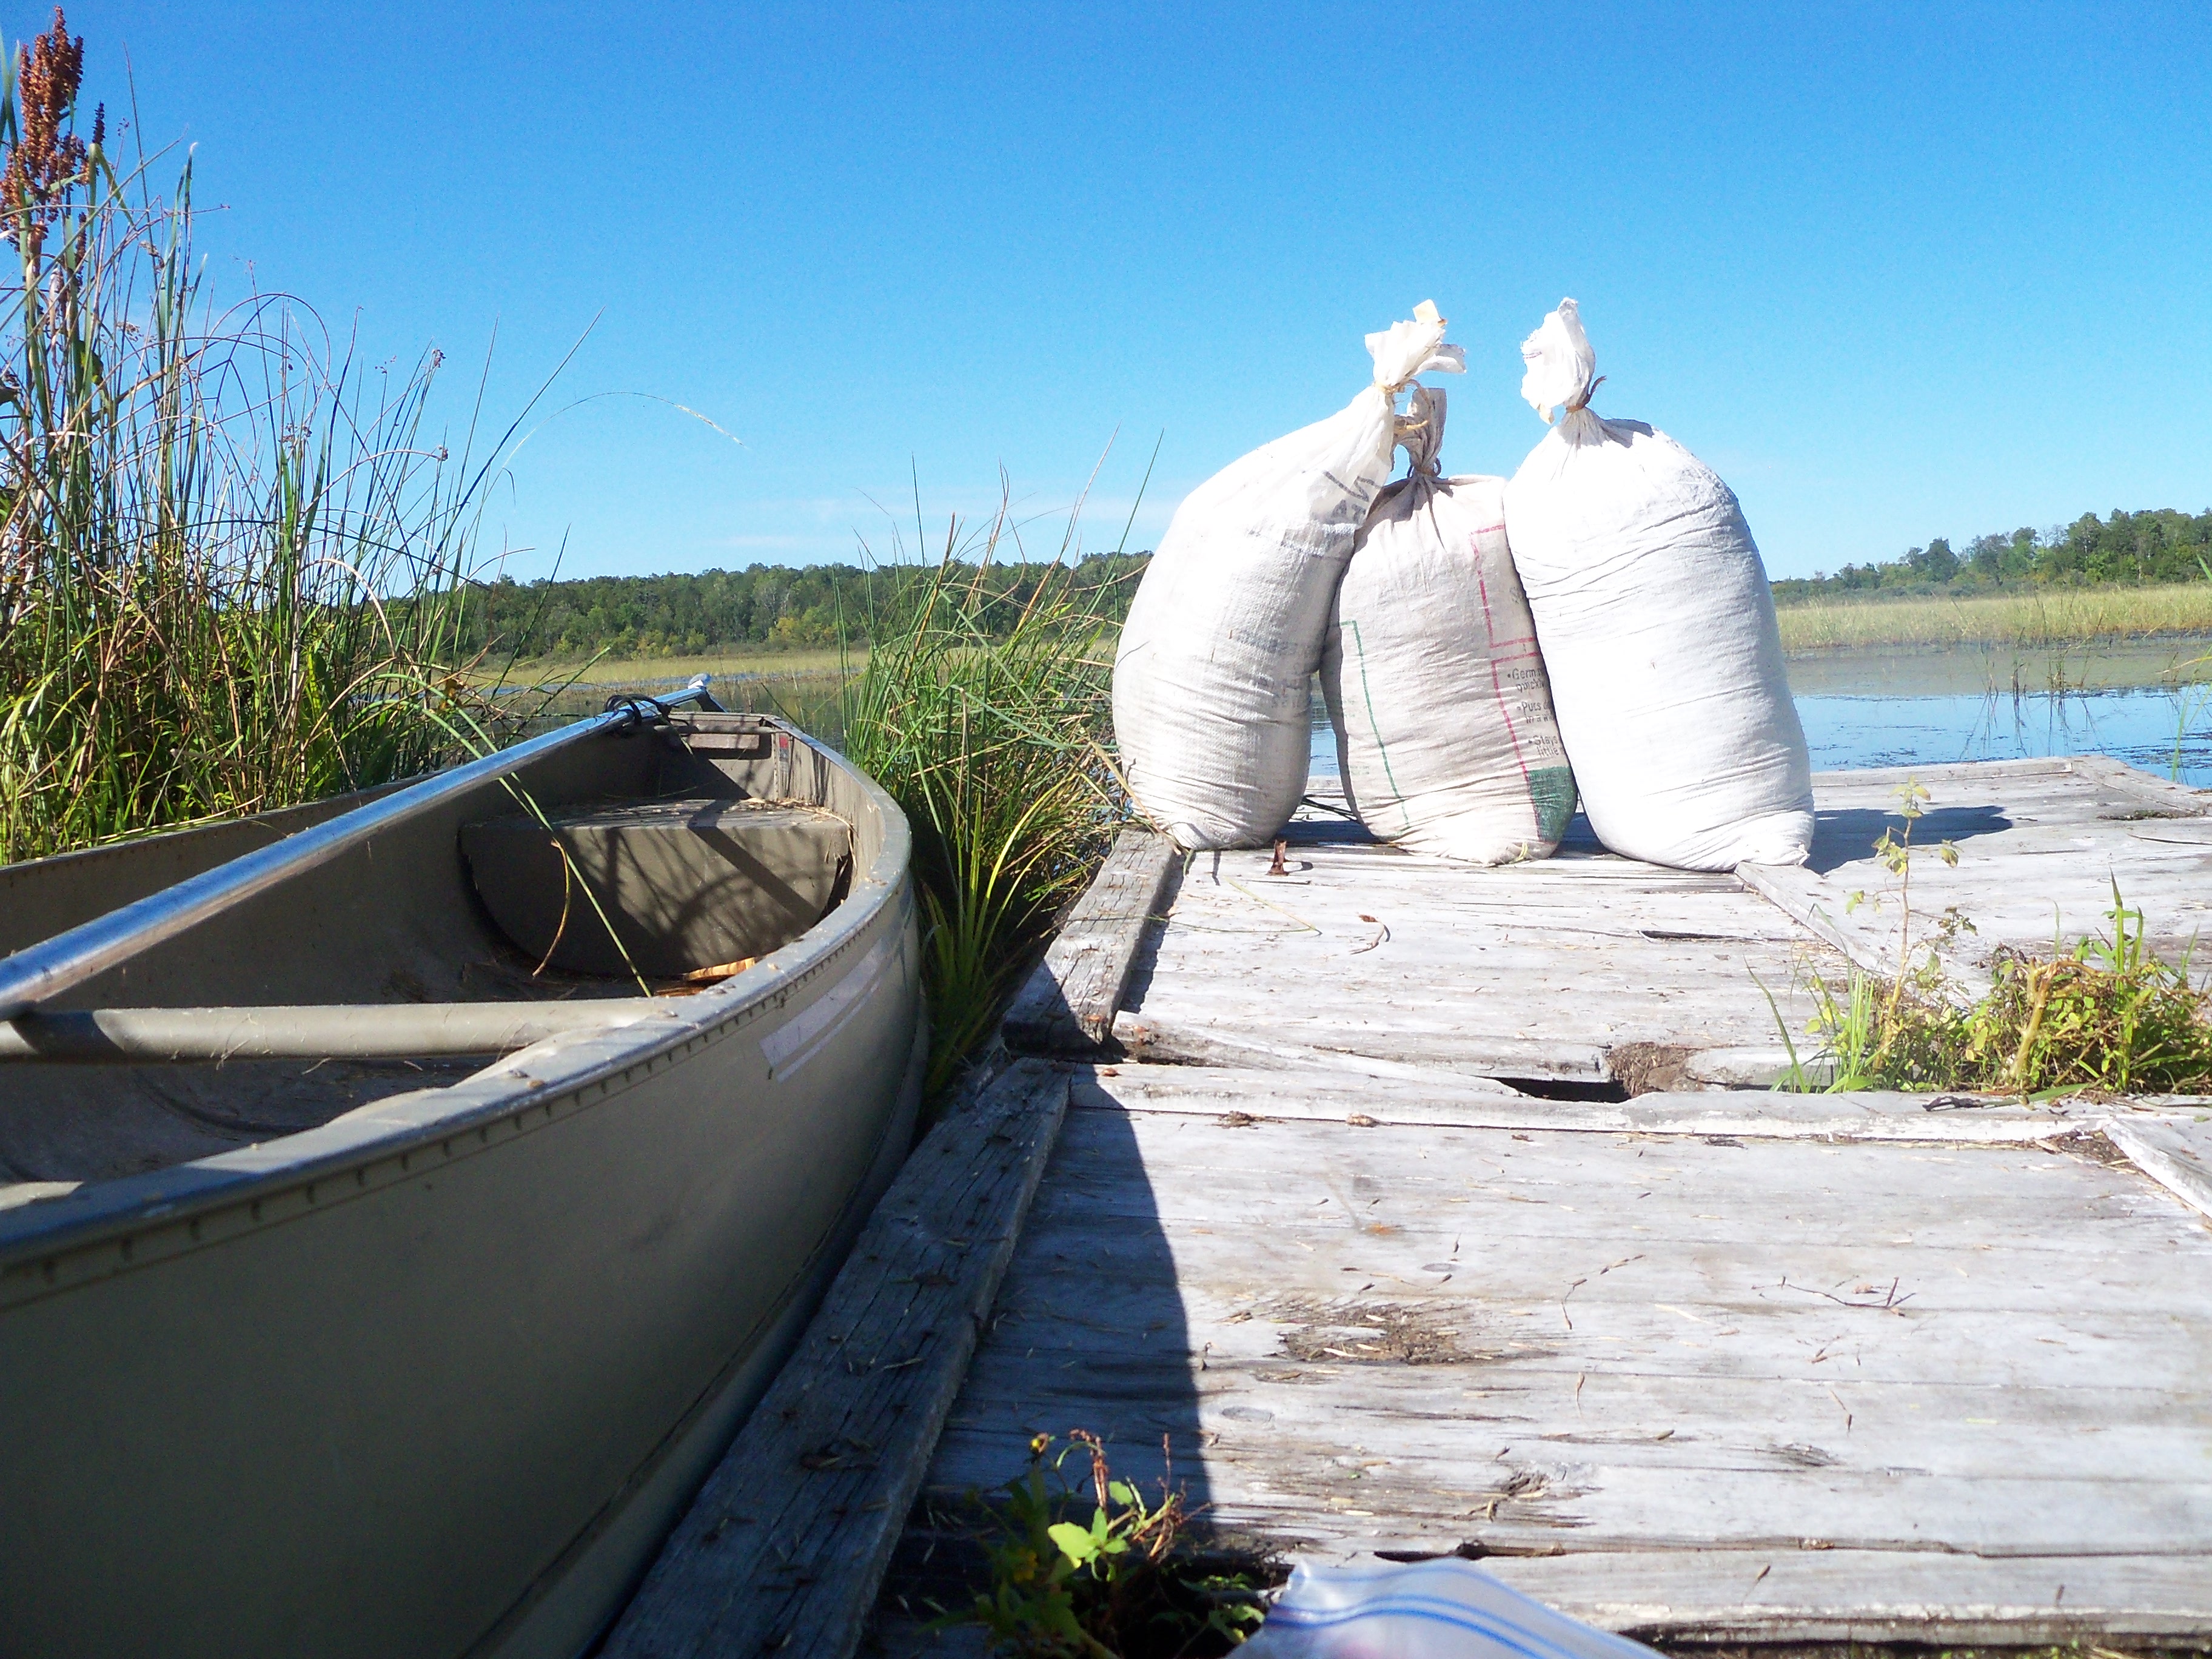 Canoe next to dock with bags of harvested wild rice